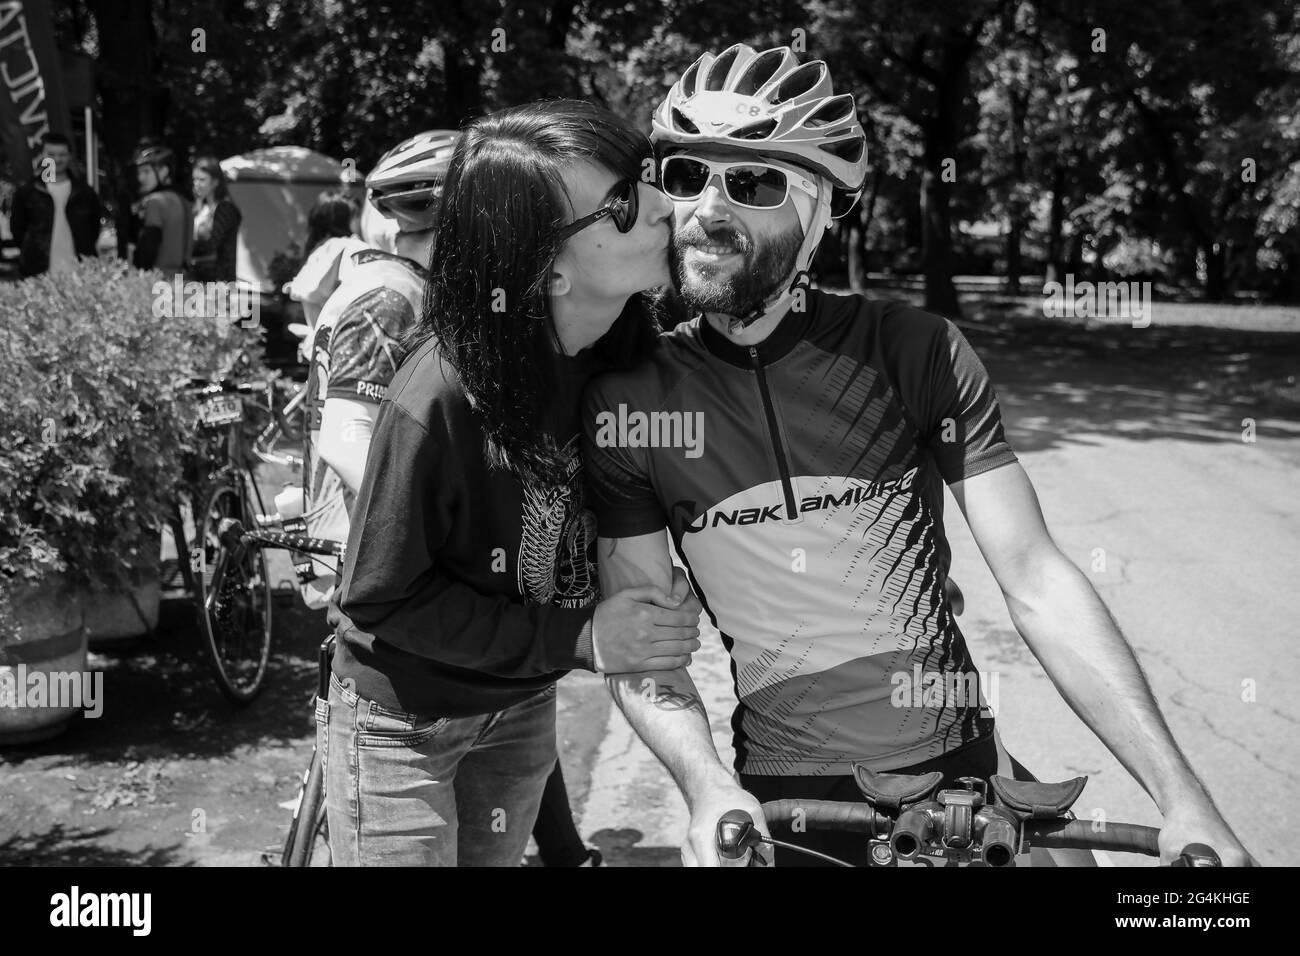 Belgrade, Serbia, May 13, 2017: A woman kissing a cyclist competitor after race (B/W) Stock Photo